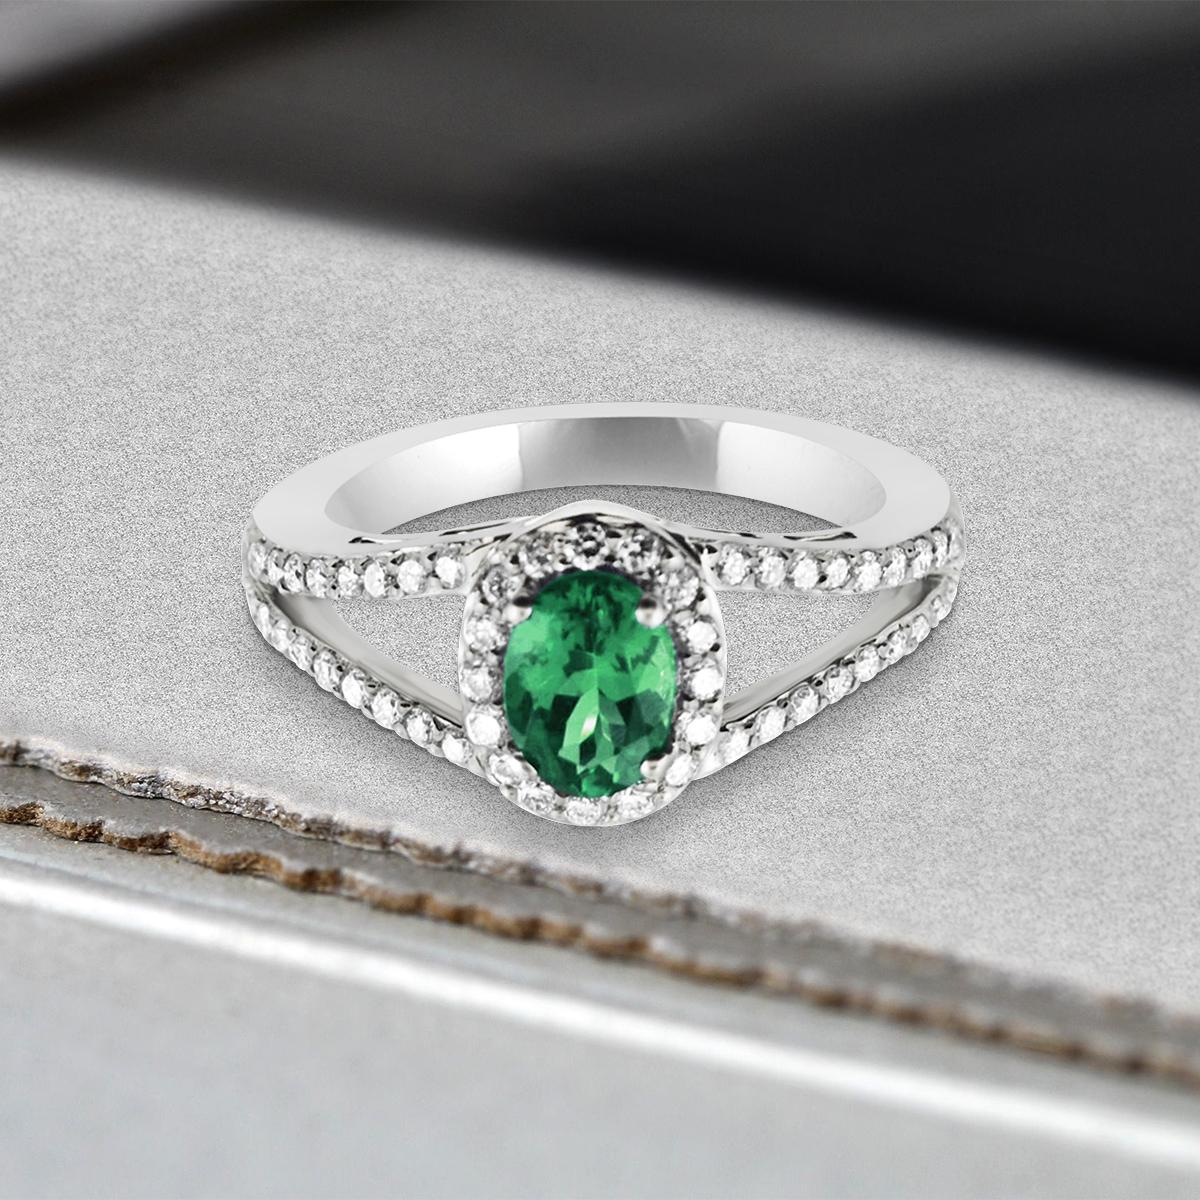 The Emerald Gemstone And Diamond Halo Ring Is Full Of Refined Elegance!
This Rare Variety Of Emerald Is A Rich, Forest Green Hue That Has A Sophisticated Sparkle And Pairs Beautifully With The Warmth Of The 14k White Gold Mounting. A Frame Of